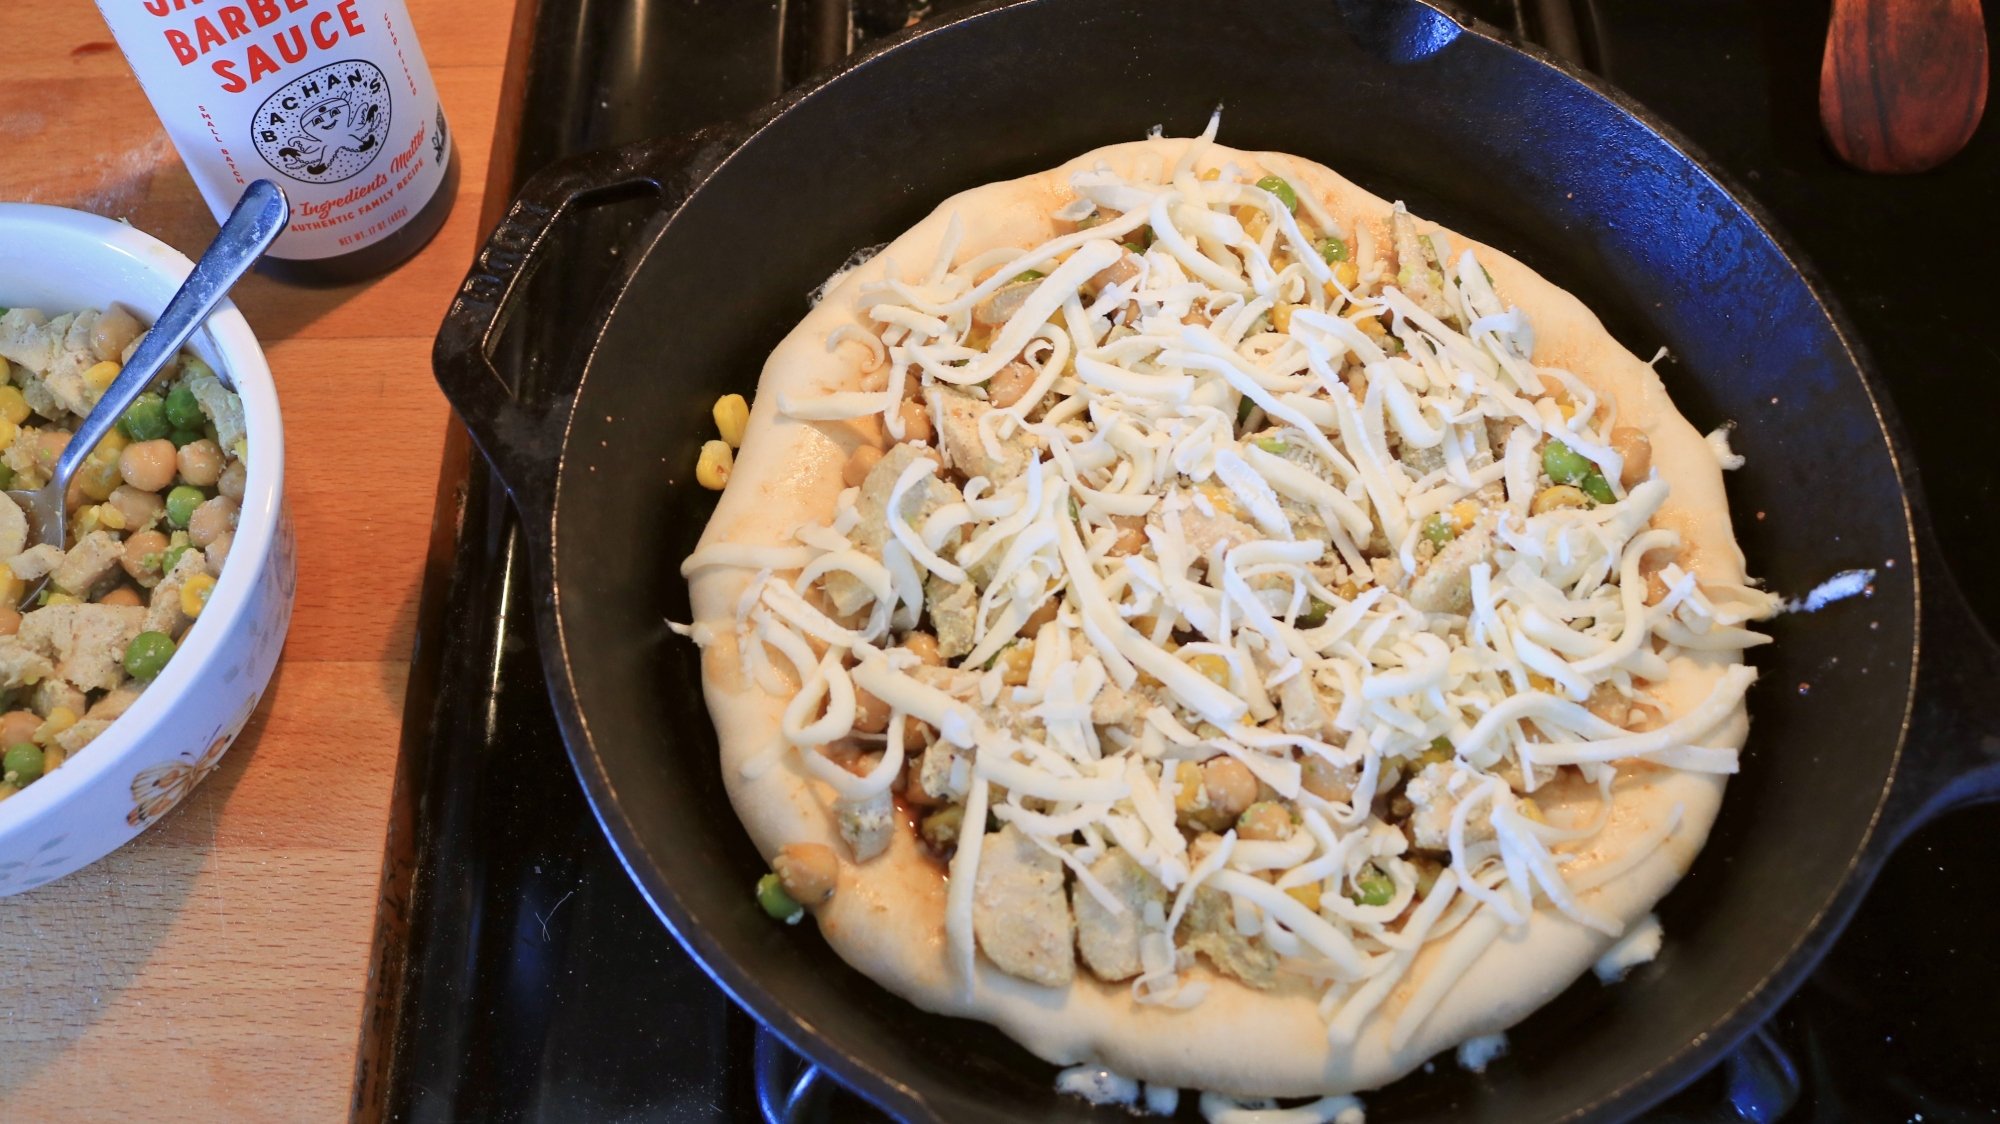 Pizza in a skillet before baking.